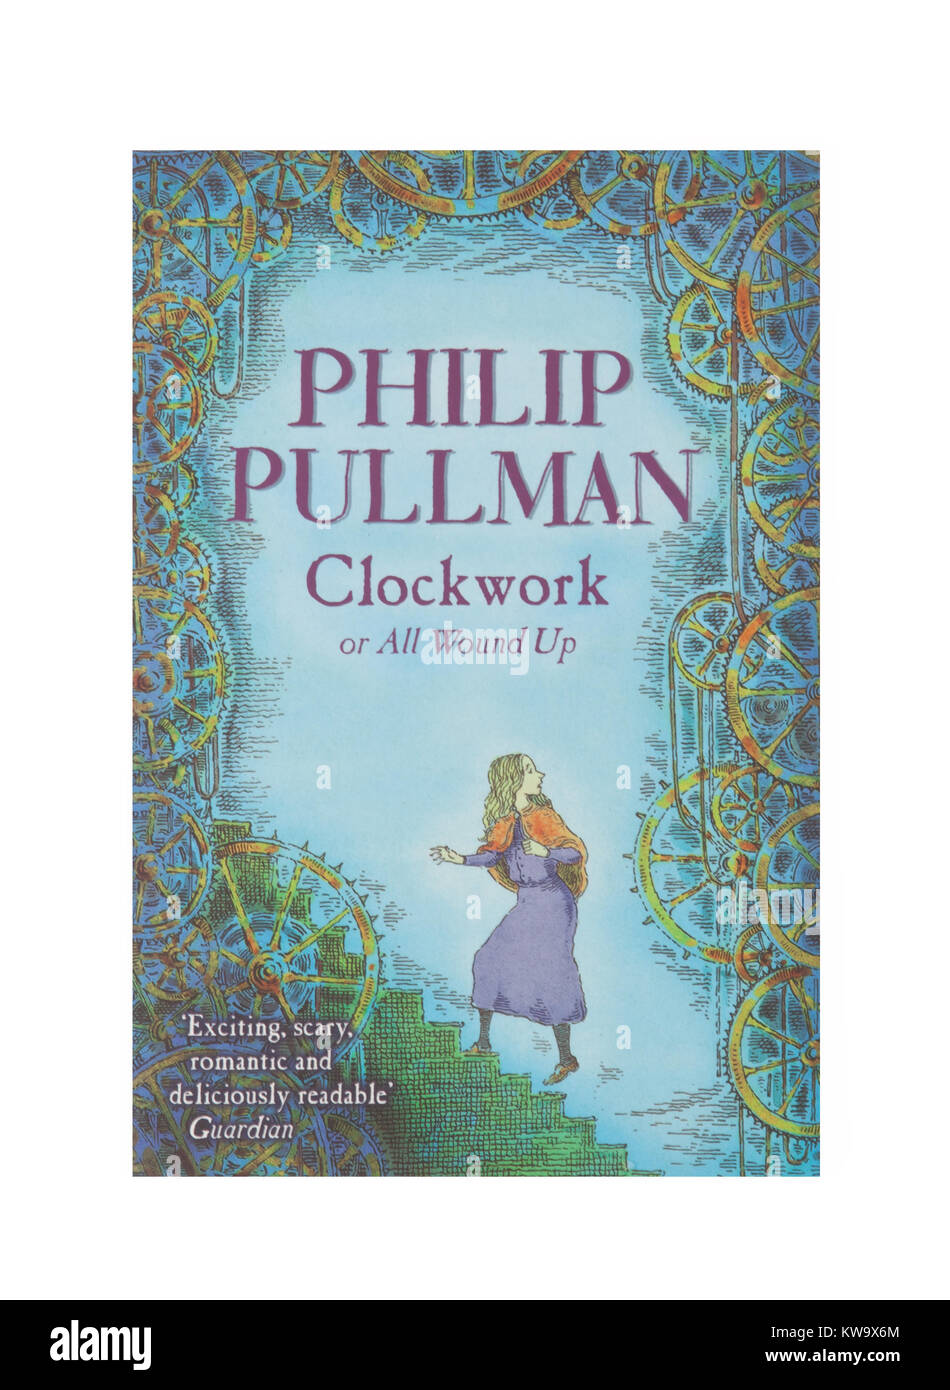 The book, Clockwork or all wound up by Philip Pullman Stock Photo